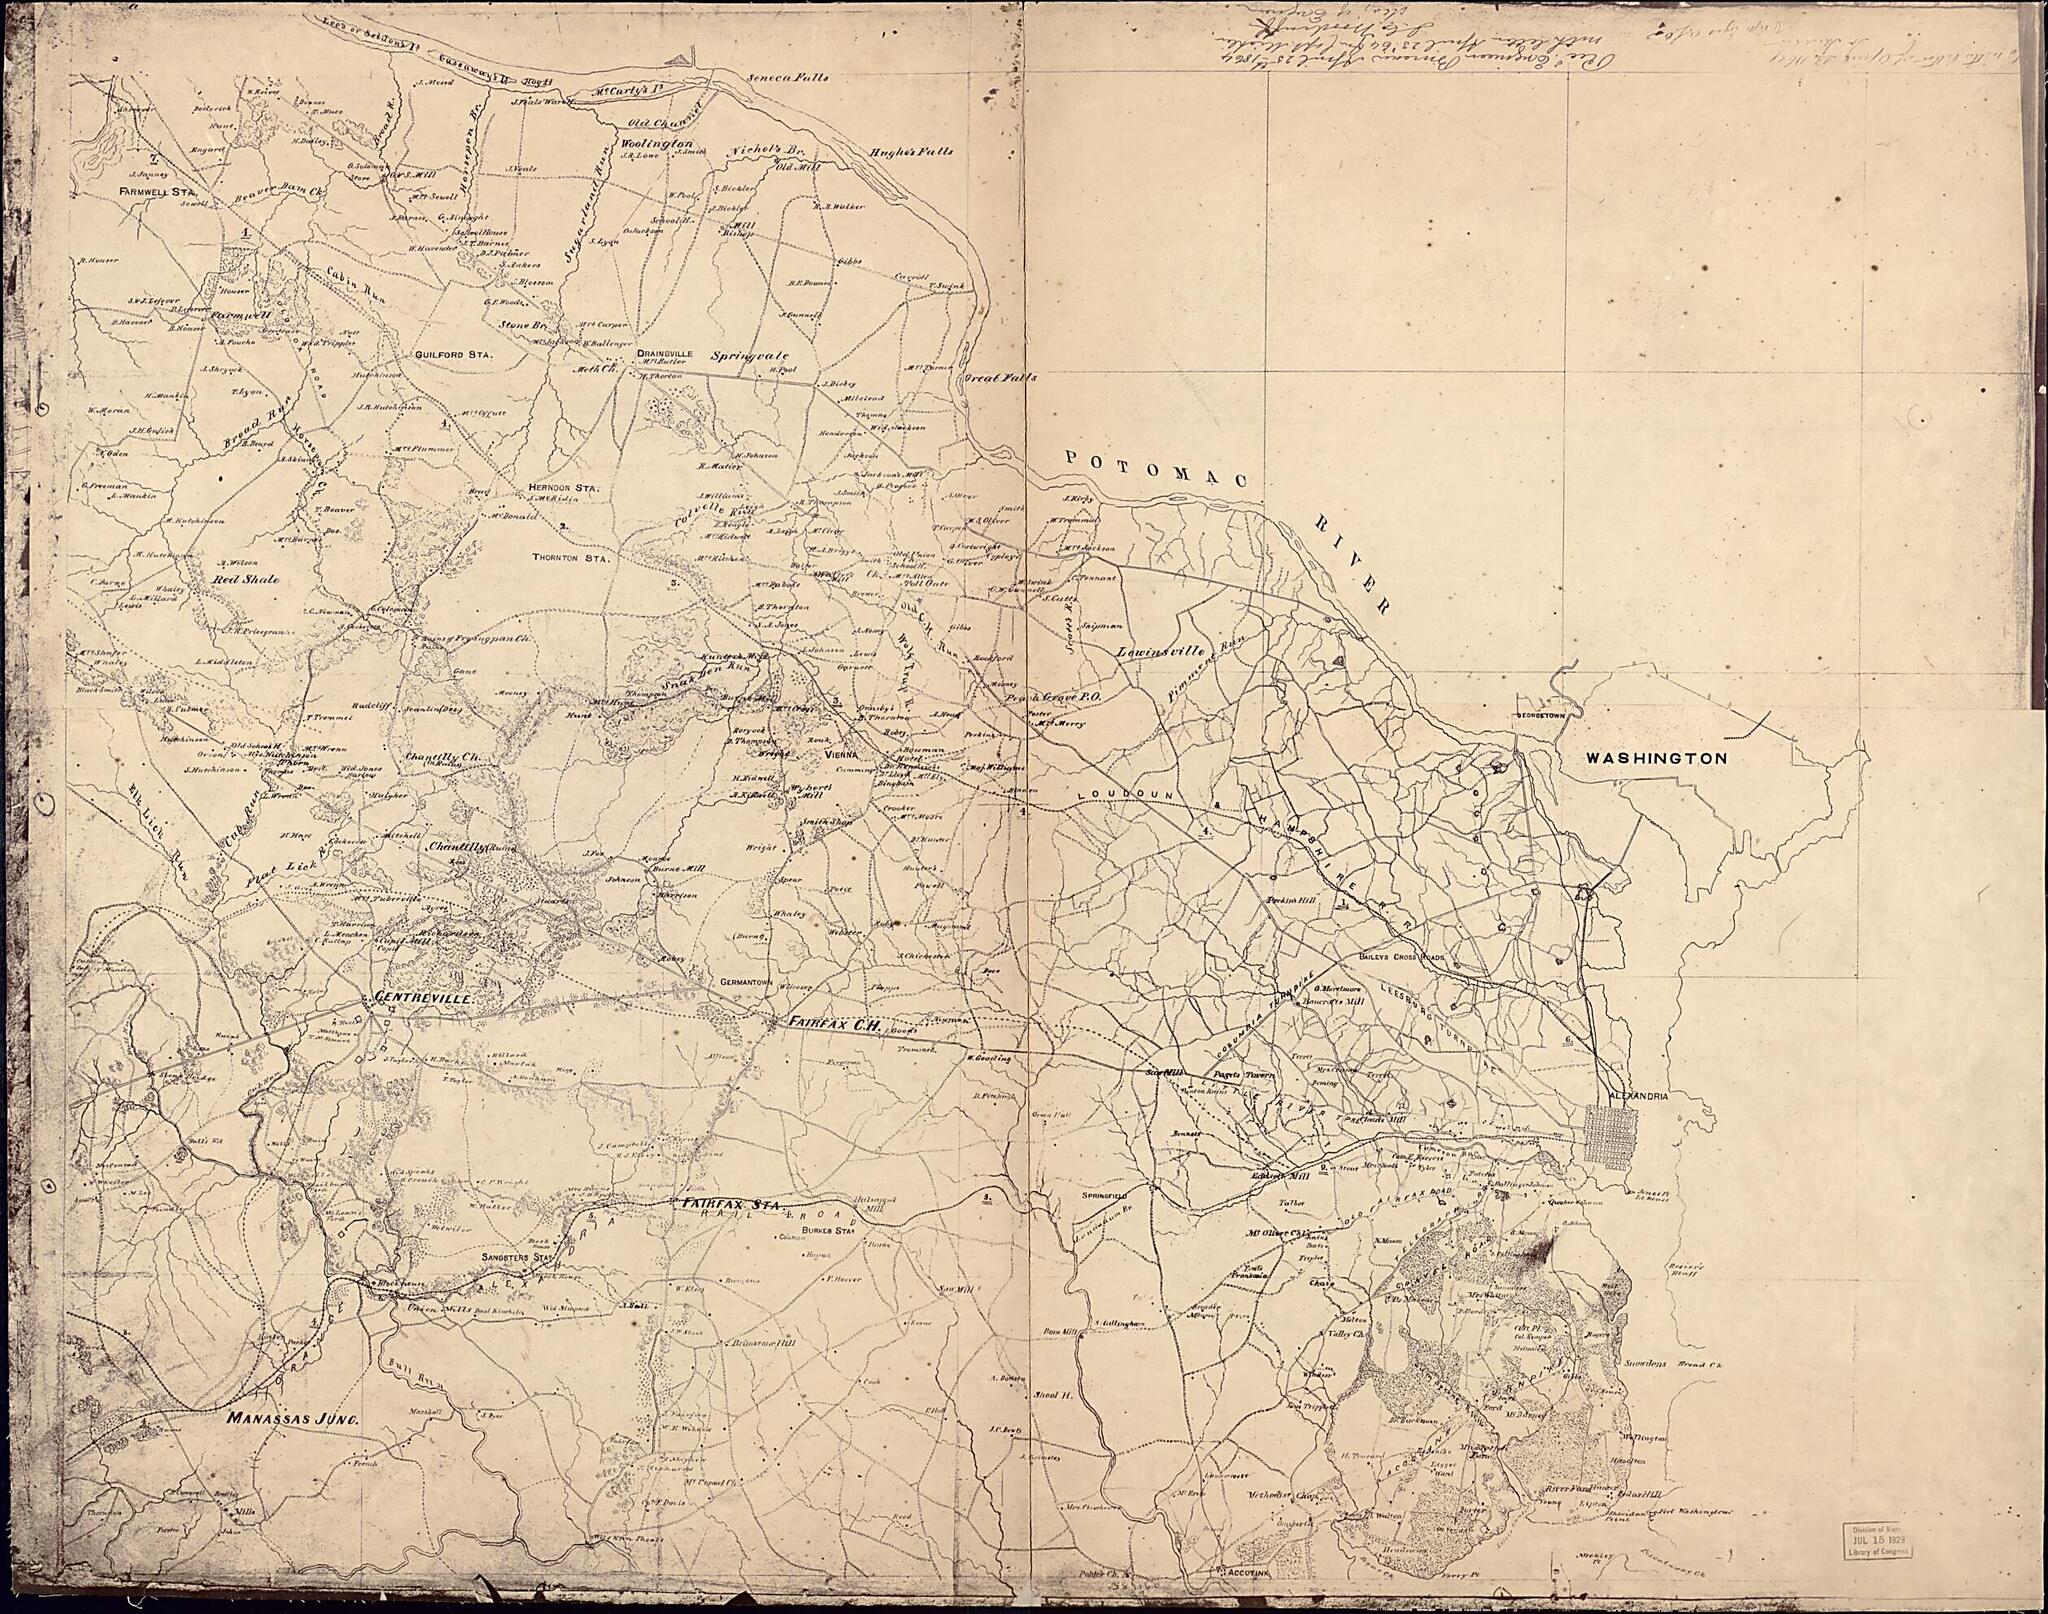 This old map of Map of Fairfax and Alexandria Counties, Virginia, and Parts of Adjoining Counties from 1864 was created by N. (Nathaniel) Michler in 1864